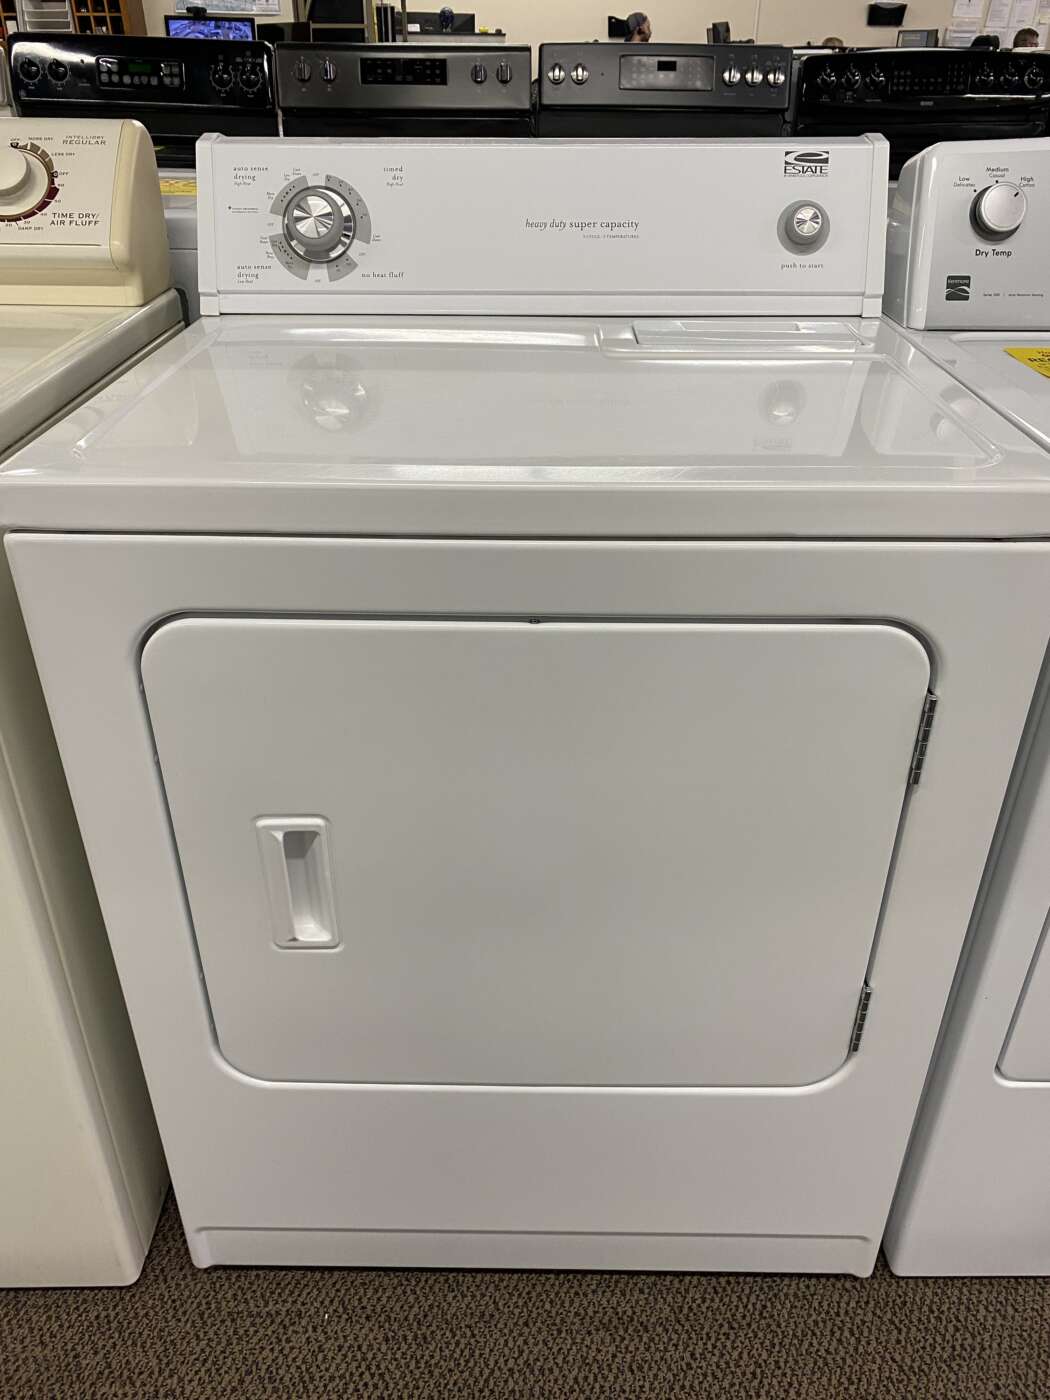 Reconditioned ESTATE 7.0 Cu. Ft. Electric Dryer – White